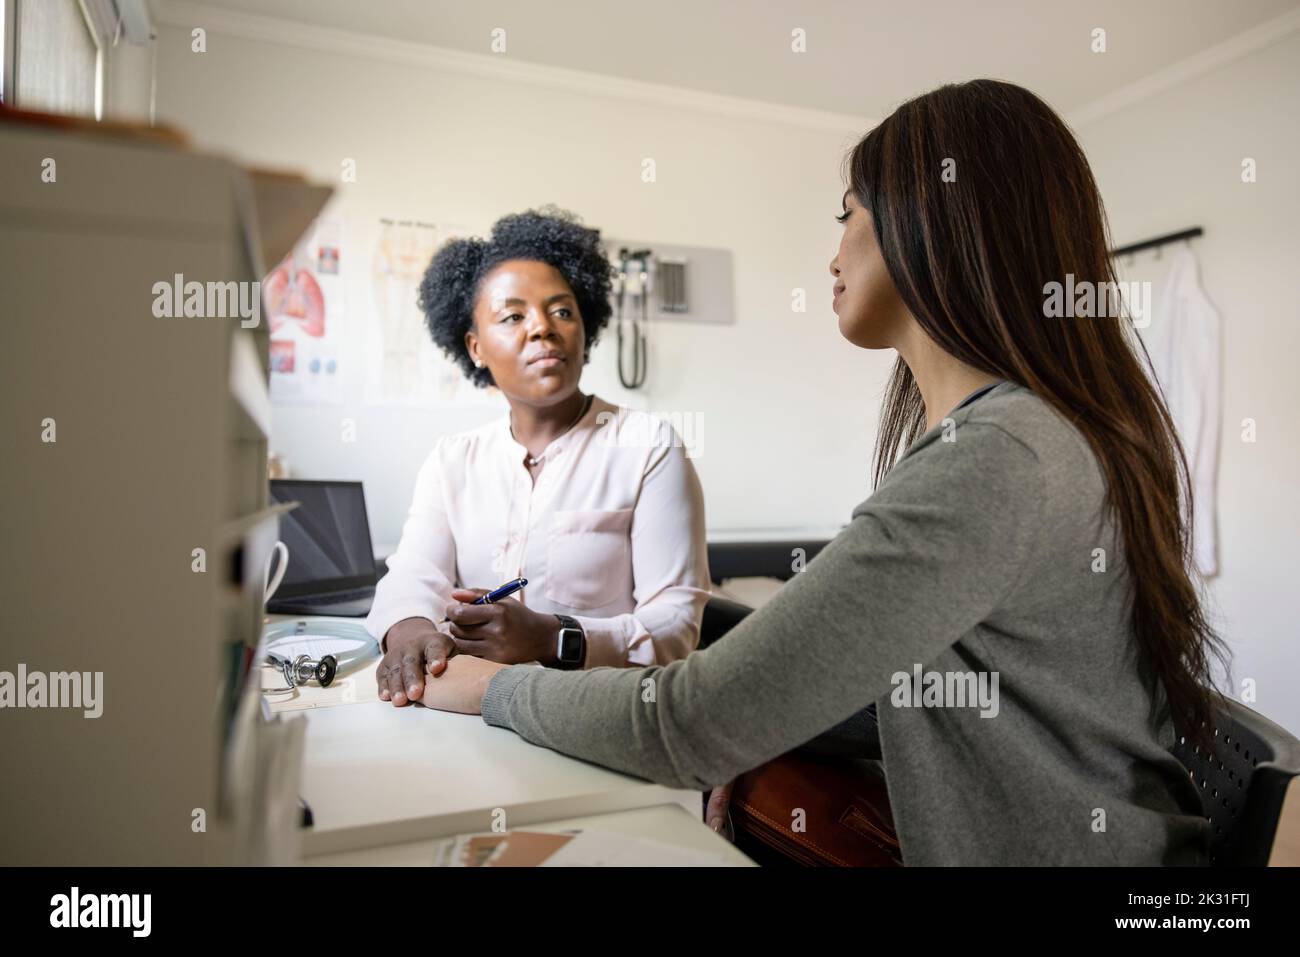 Female doctor comforting patient in clinic doctor's office Stock Photo